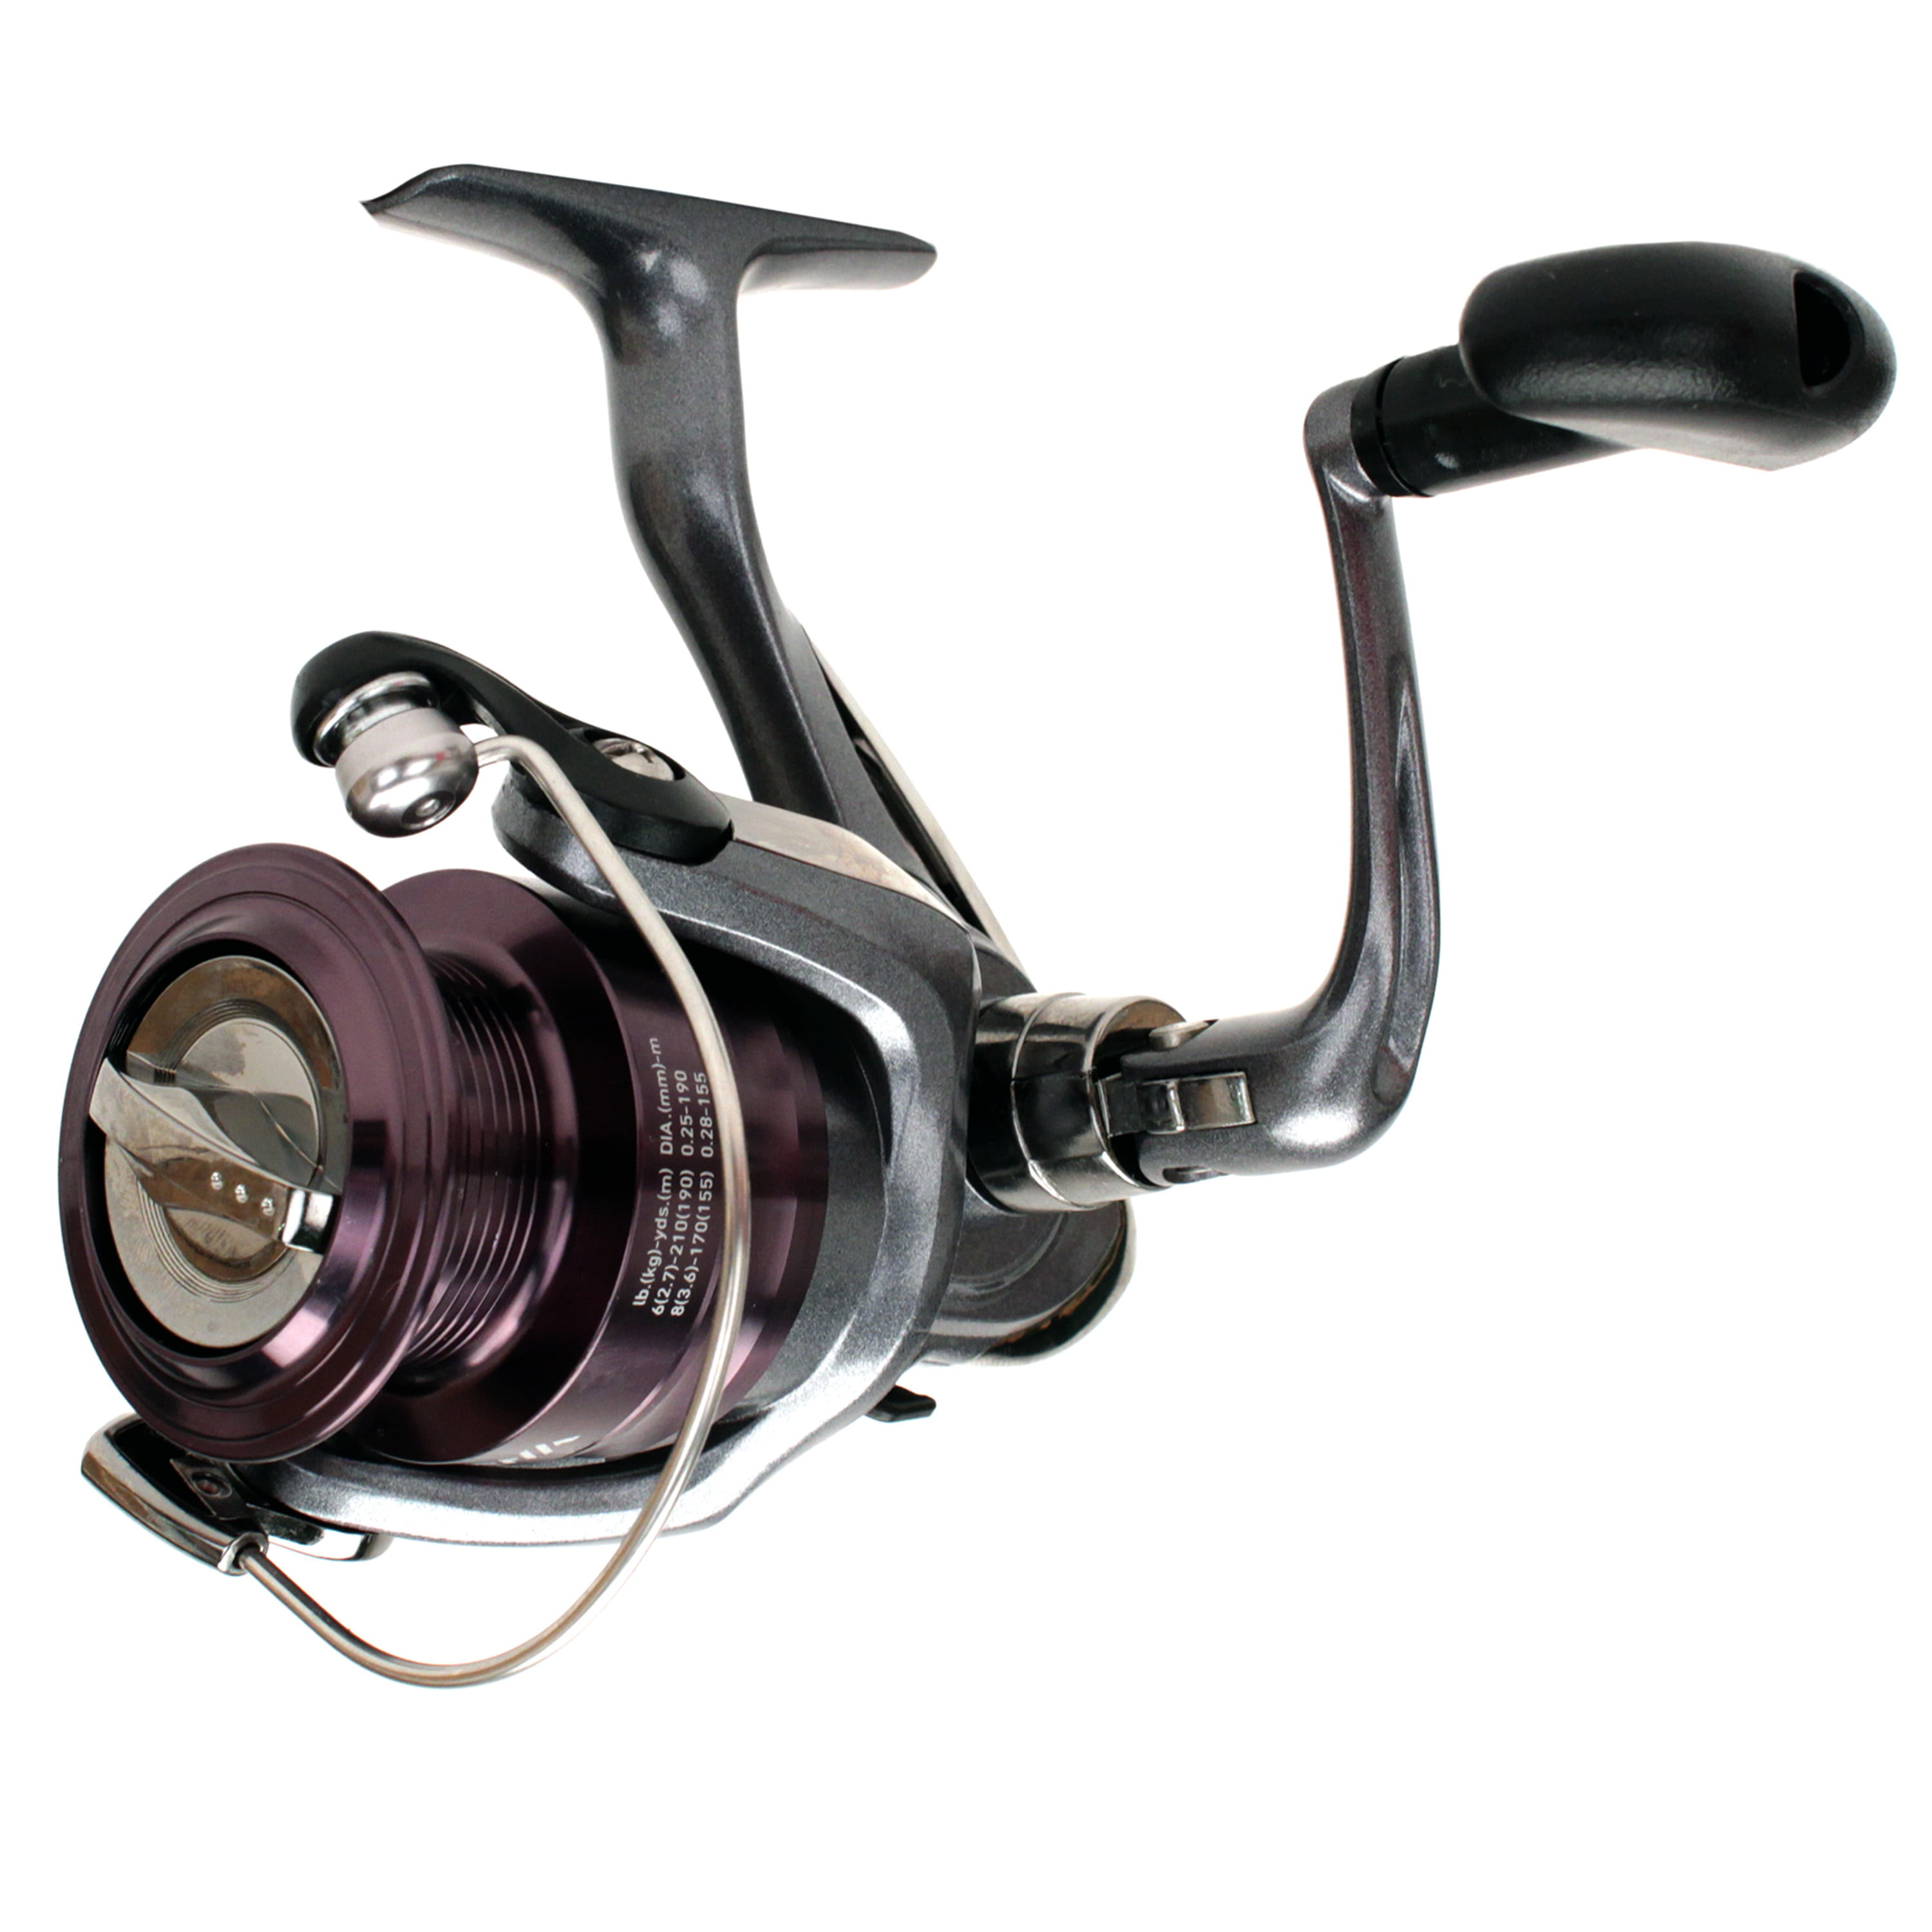 NEW DAIWA CF3000 Crossfire FD Spin spinning Fishing Reel 3bb for rod $29.95  - PicClick